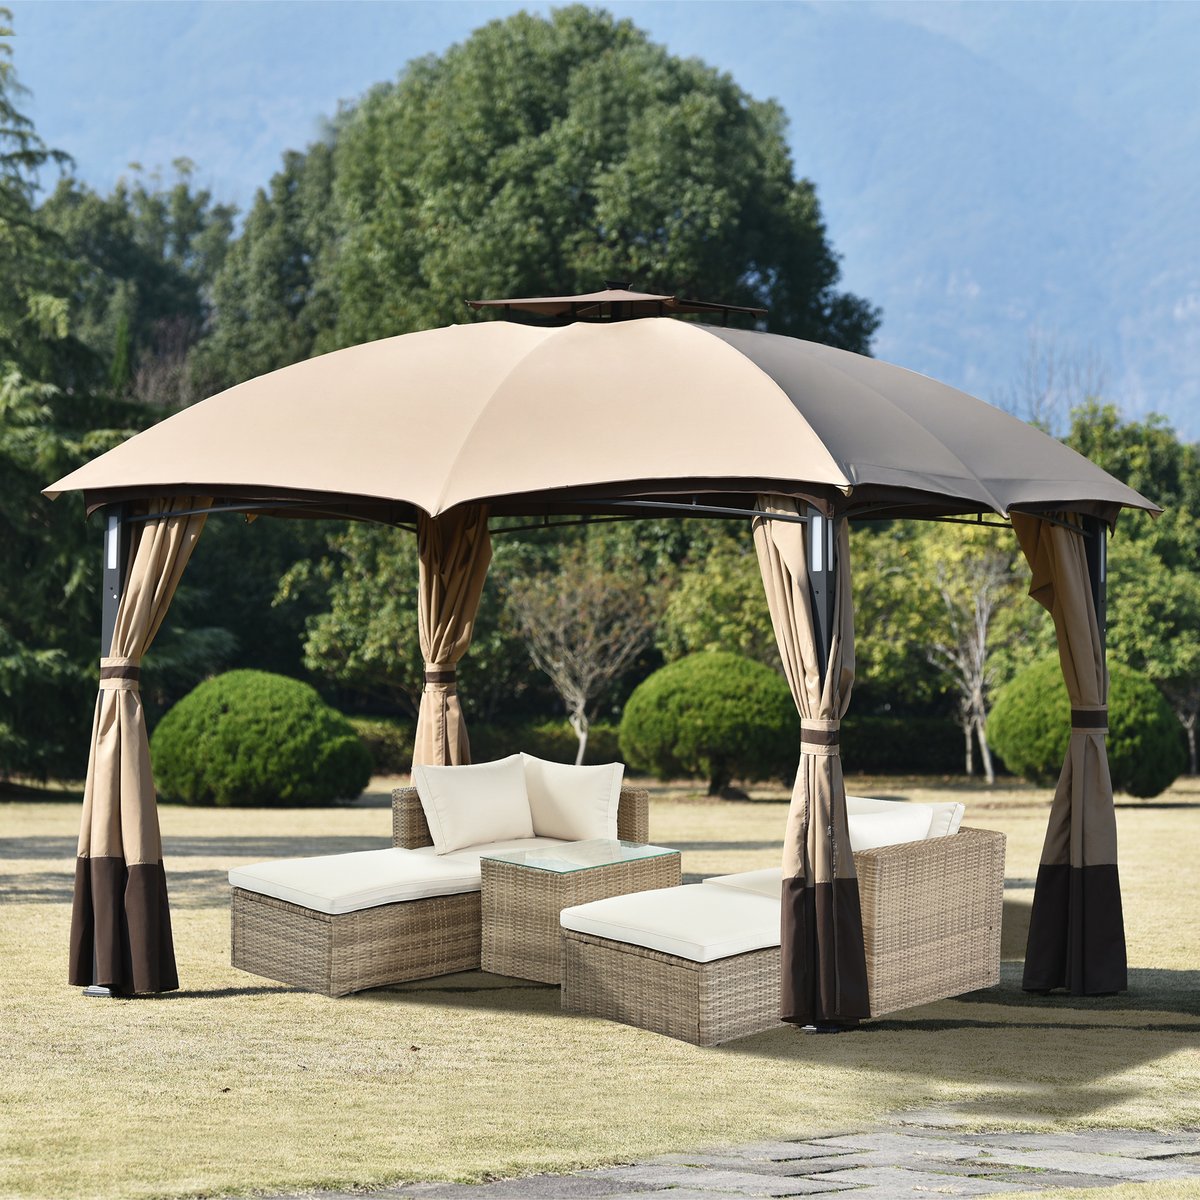 Escape the sun & create a backyard oasis with our elegant gazebos. Perfect for entertaining, relaxing, or enjoying a peaceful retreat. Durable materials & various styles to suit any taste. Shop now at sunlitbackyardoasis.com.
#GazeboLife #OutdoorLiving #gazebo #backyardvibes